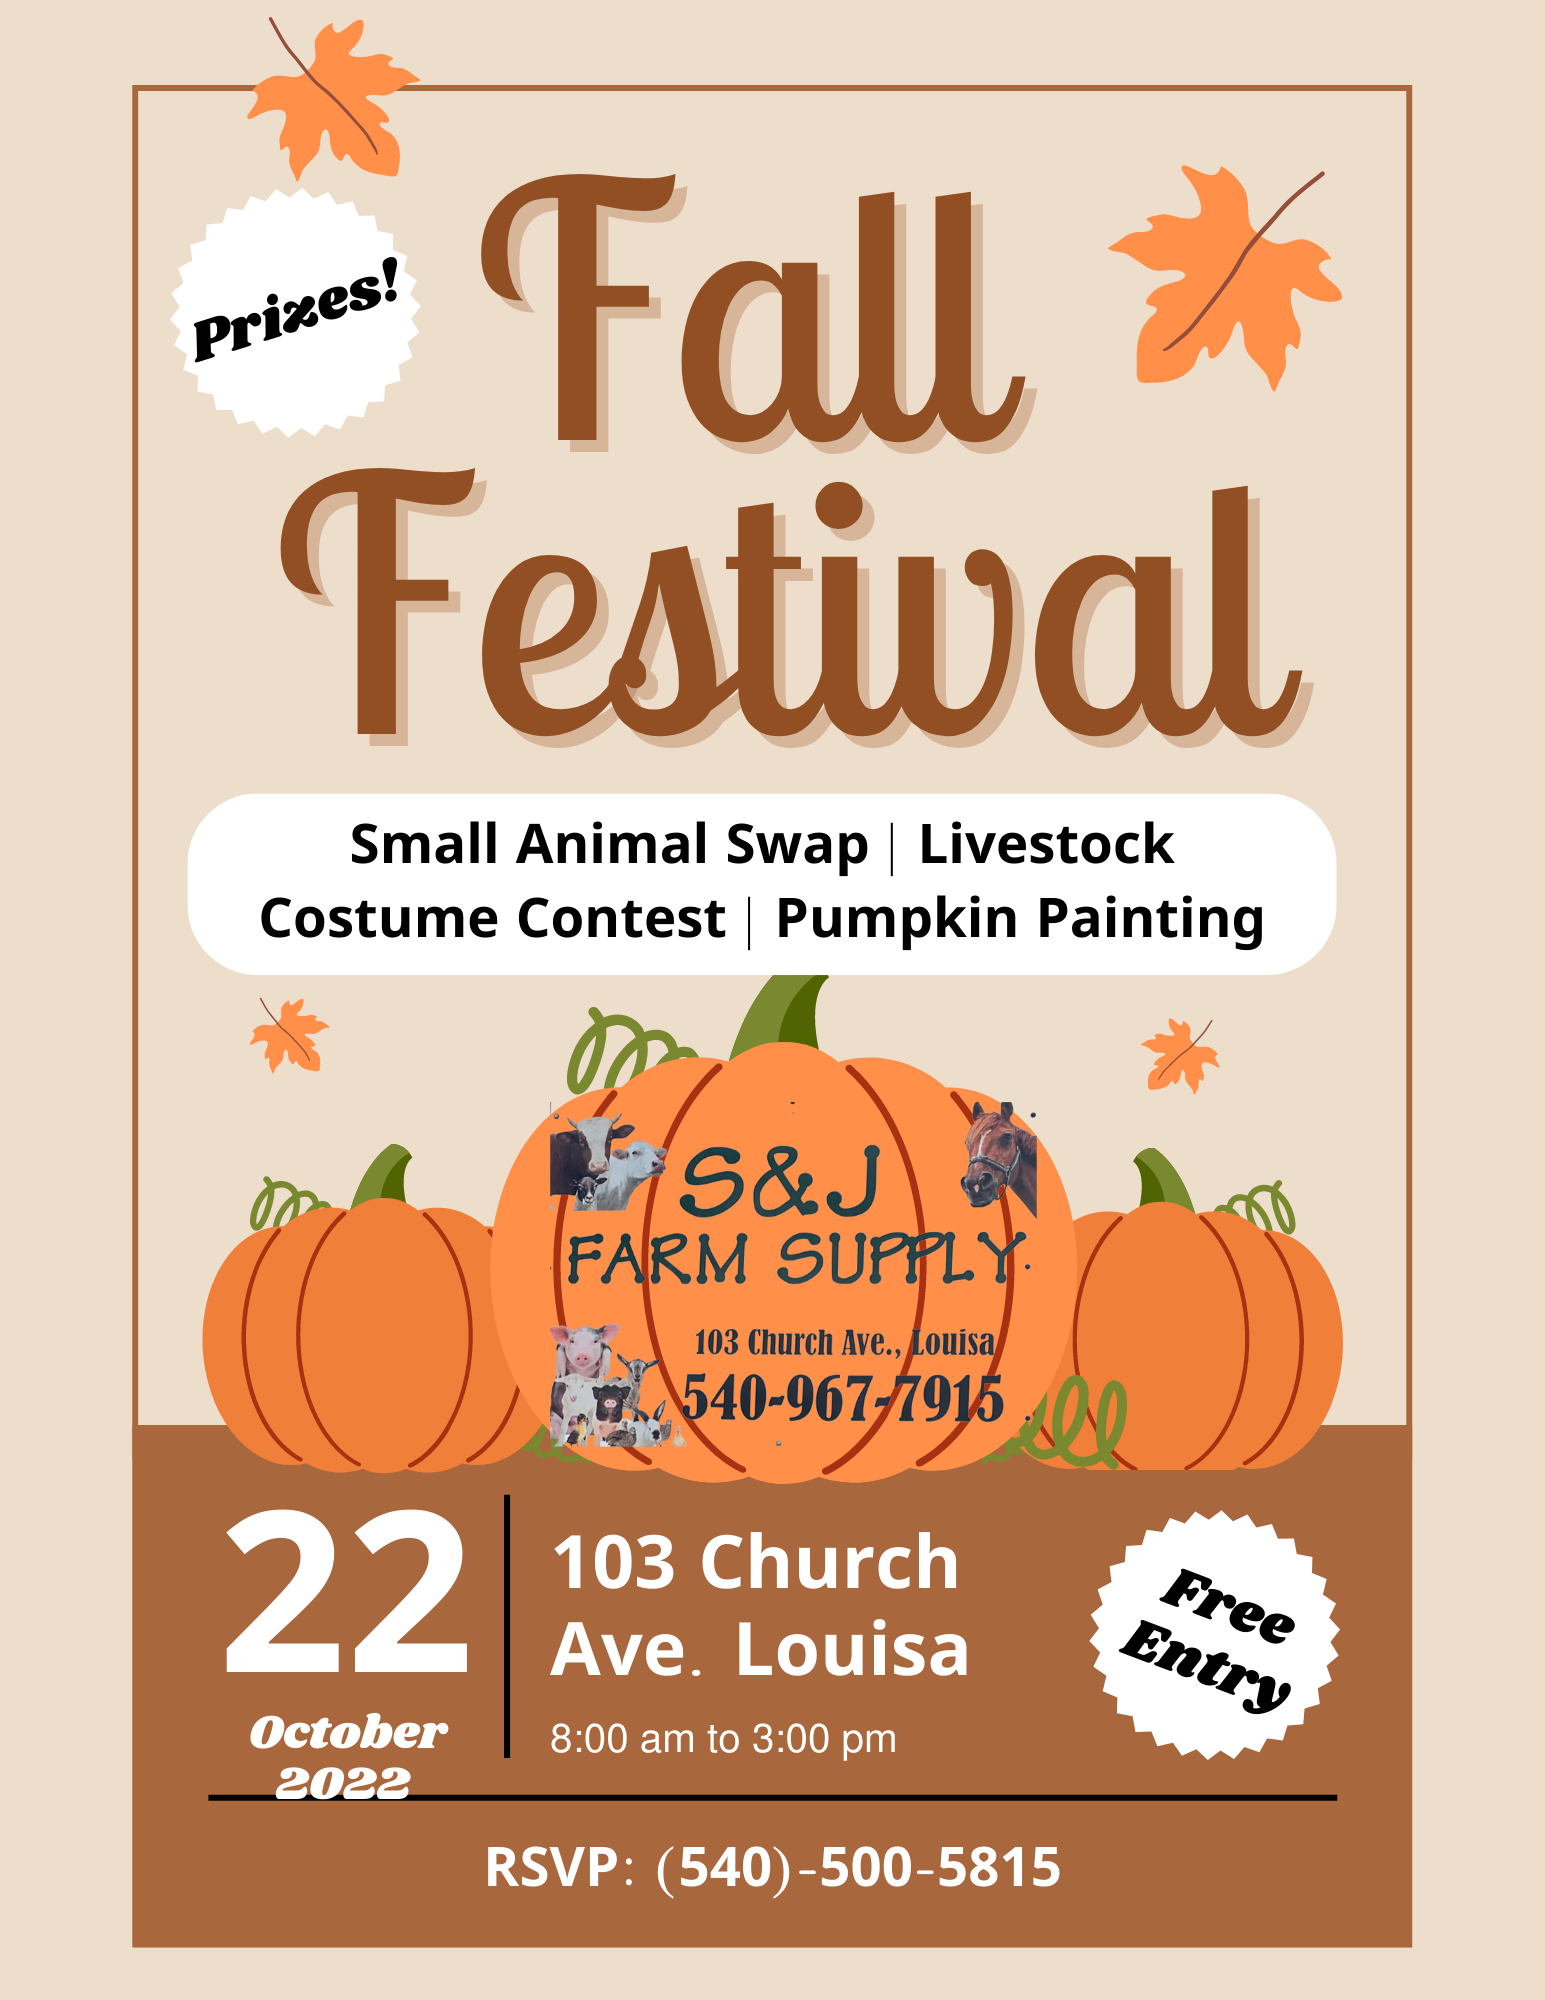 <h1 class="tribe-events-single-event-title">Fall Festival</h1>